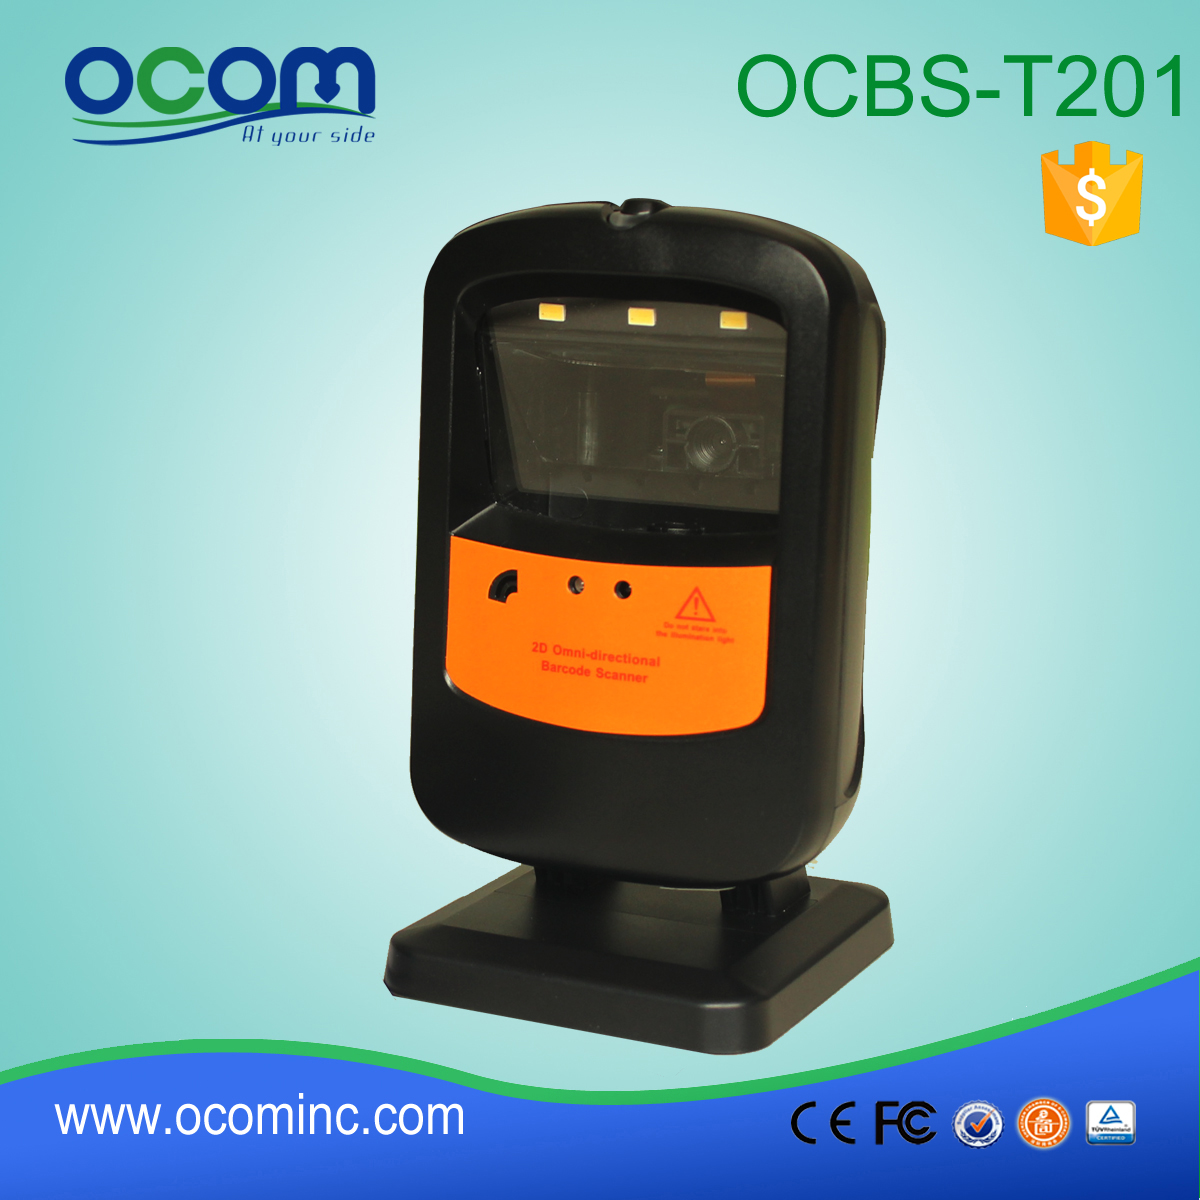 OCBS-T201:china barcode scanner rs232, cheap barcode scanner